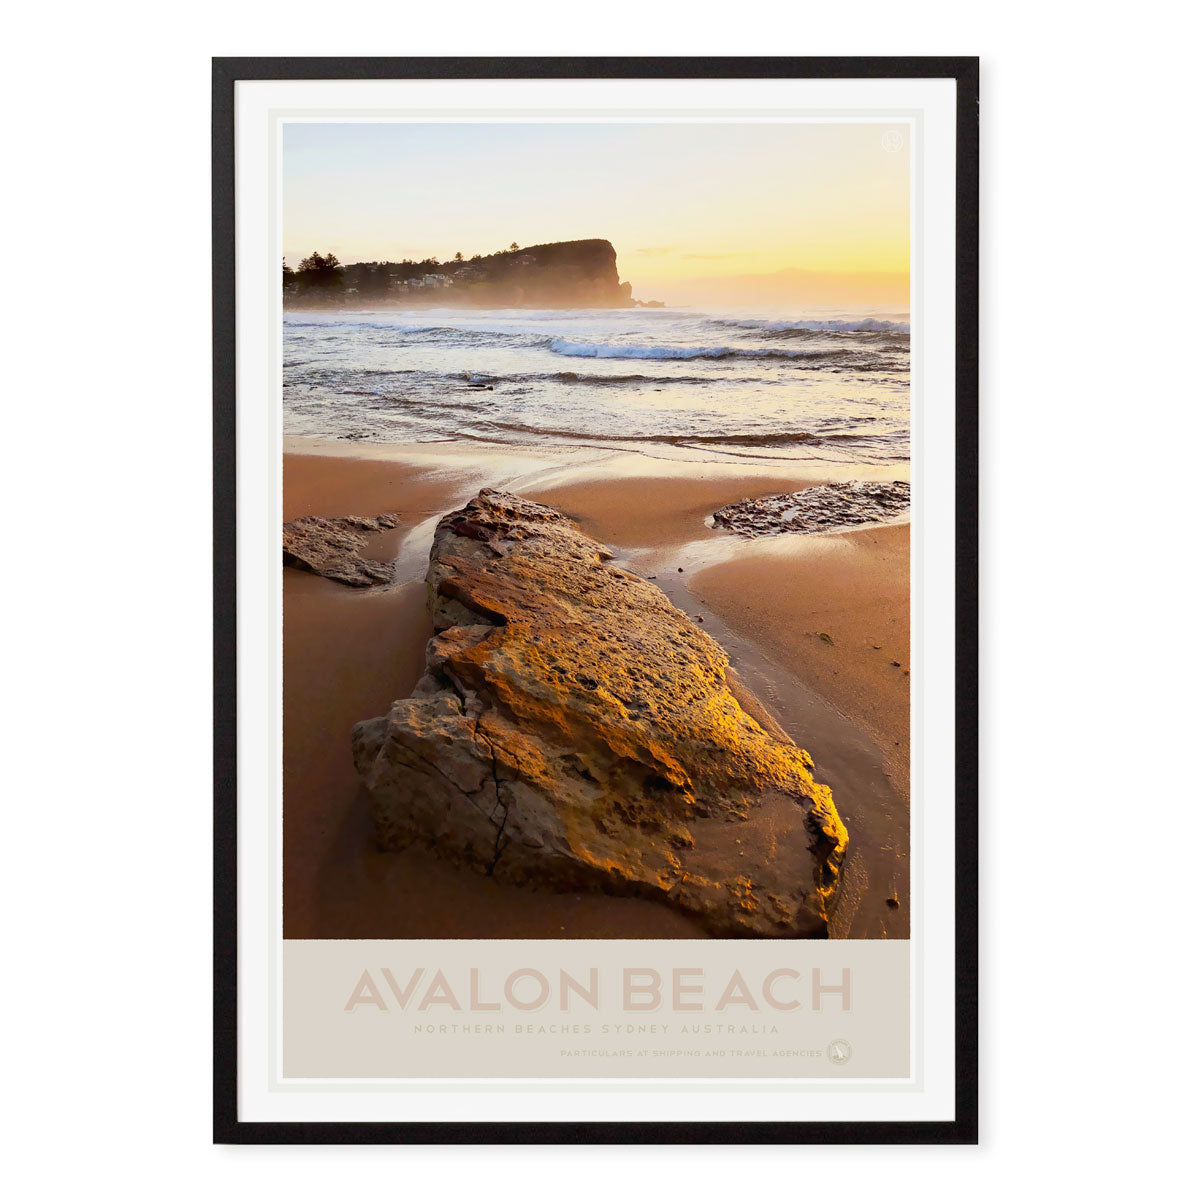 Avalon Beach vintage retro poster print in black frame from Places we Luv